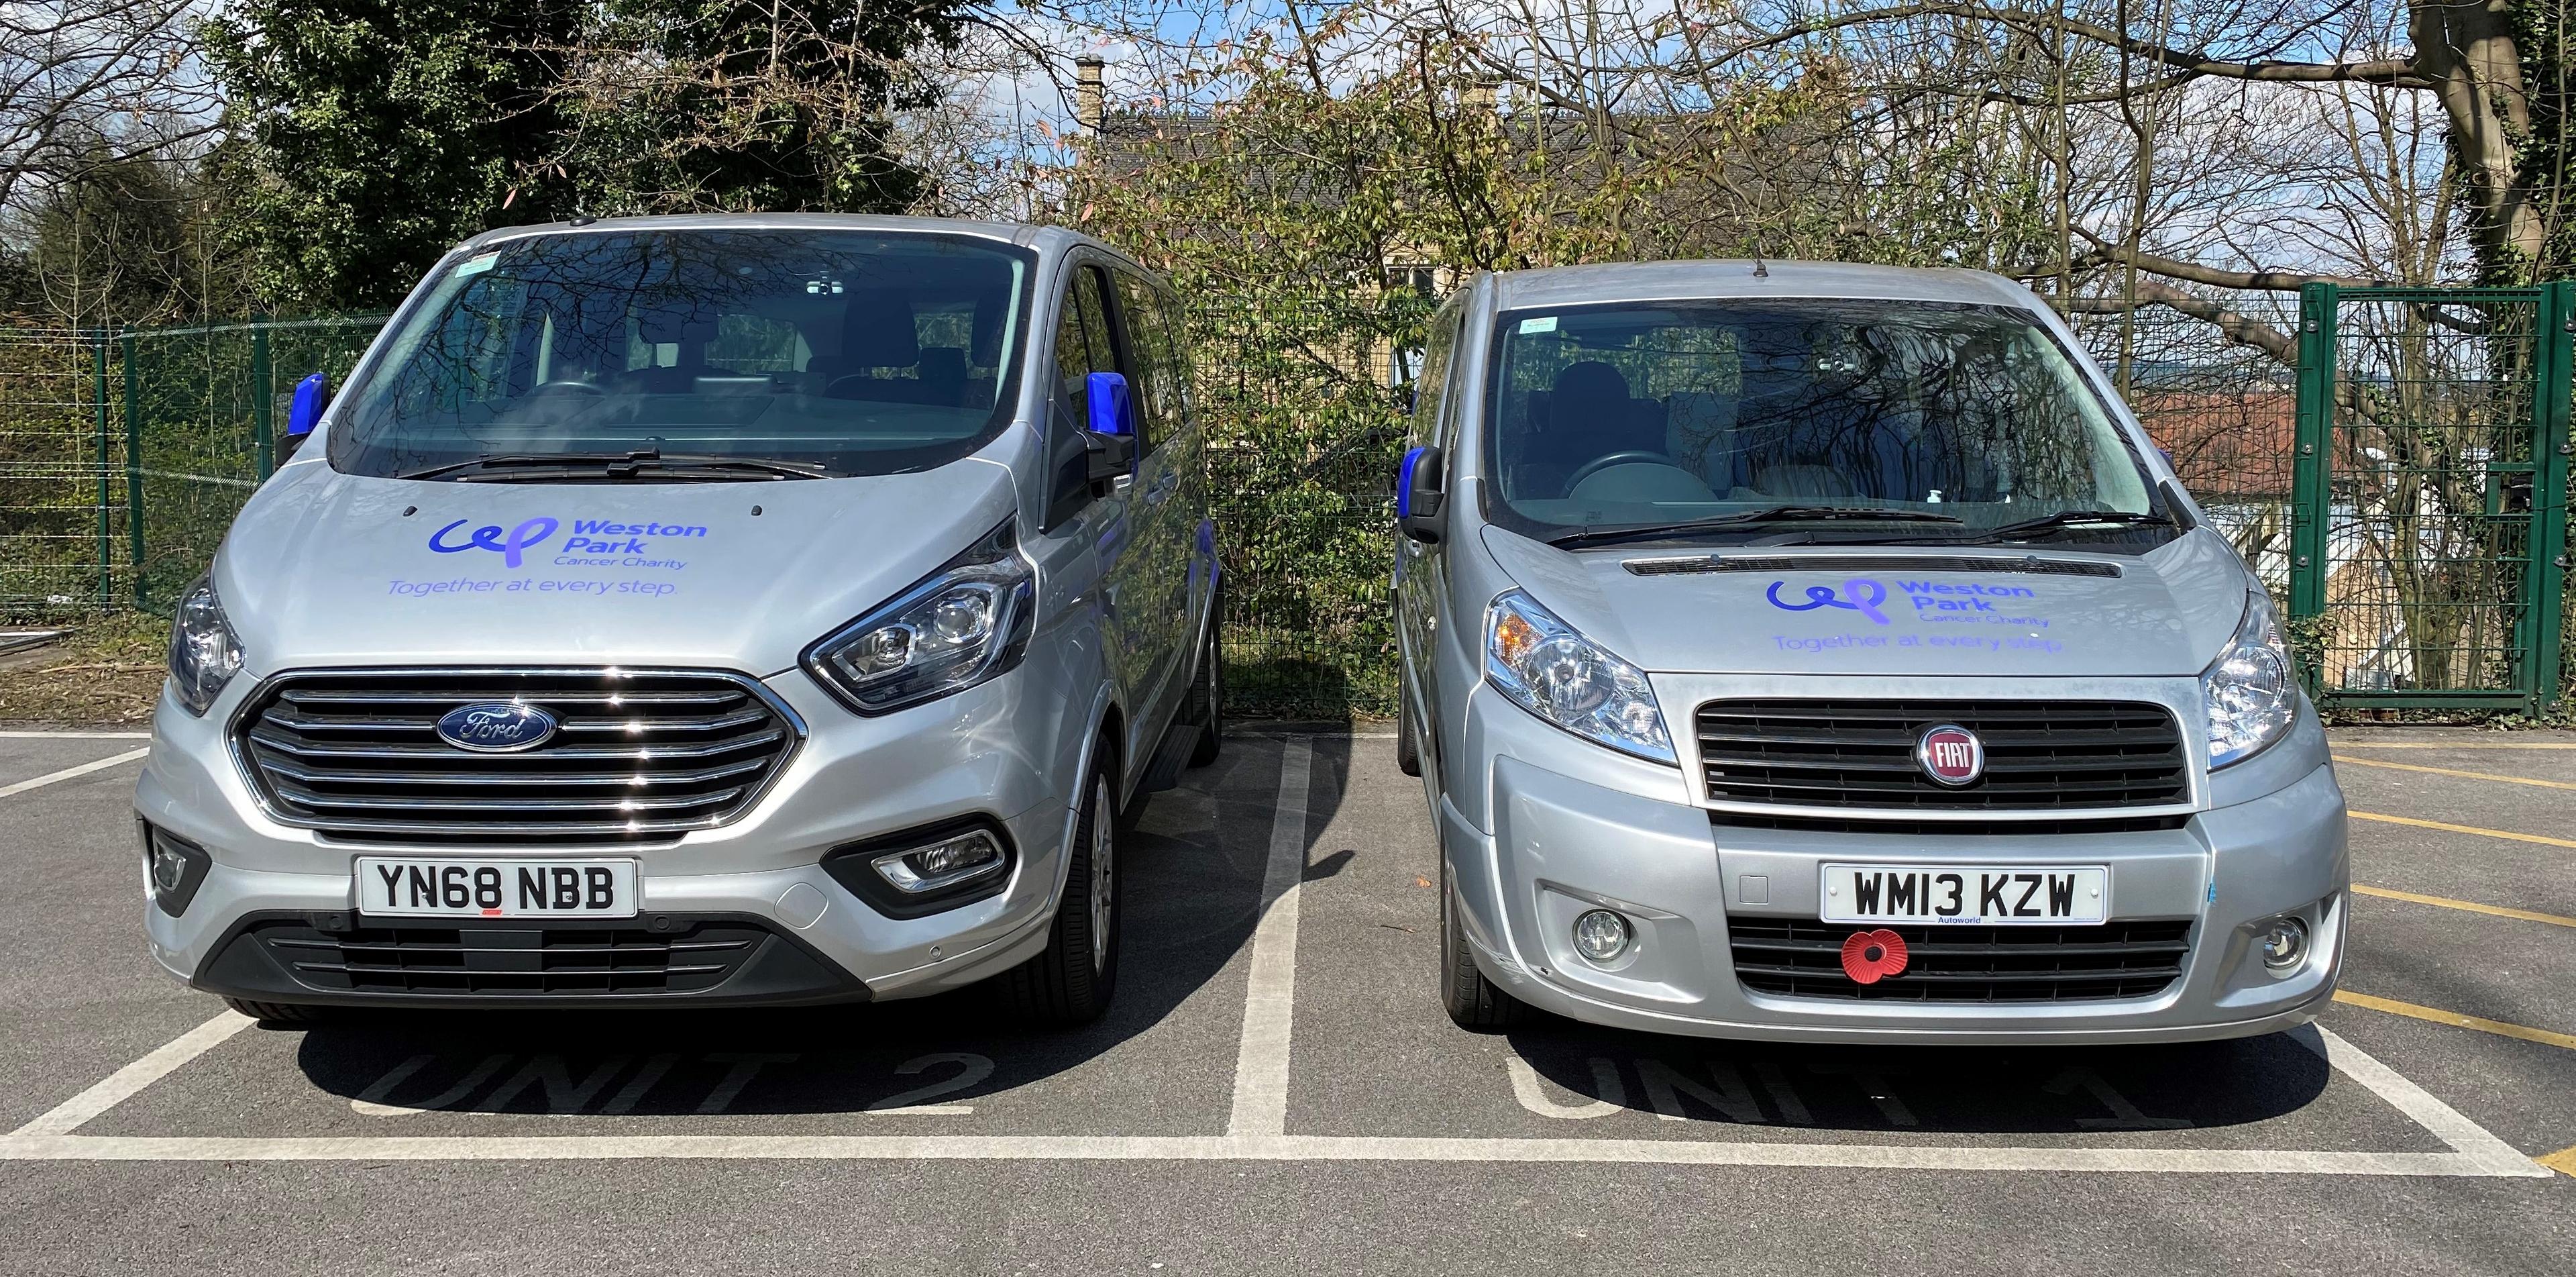 Two silver parked vehicles which have the Weston Park Cancer Charity logo on them